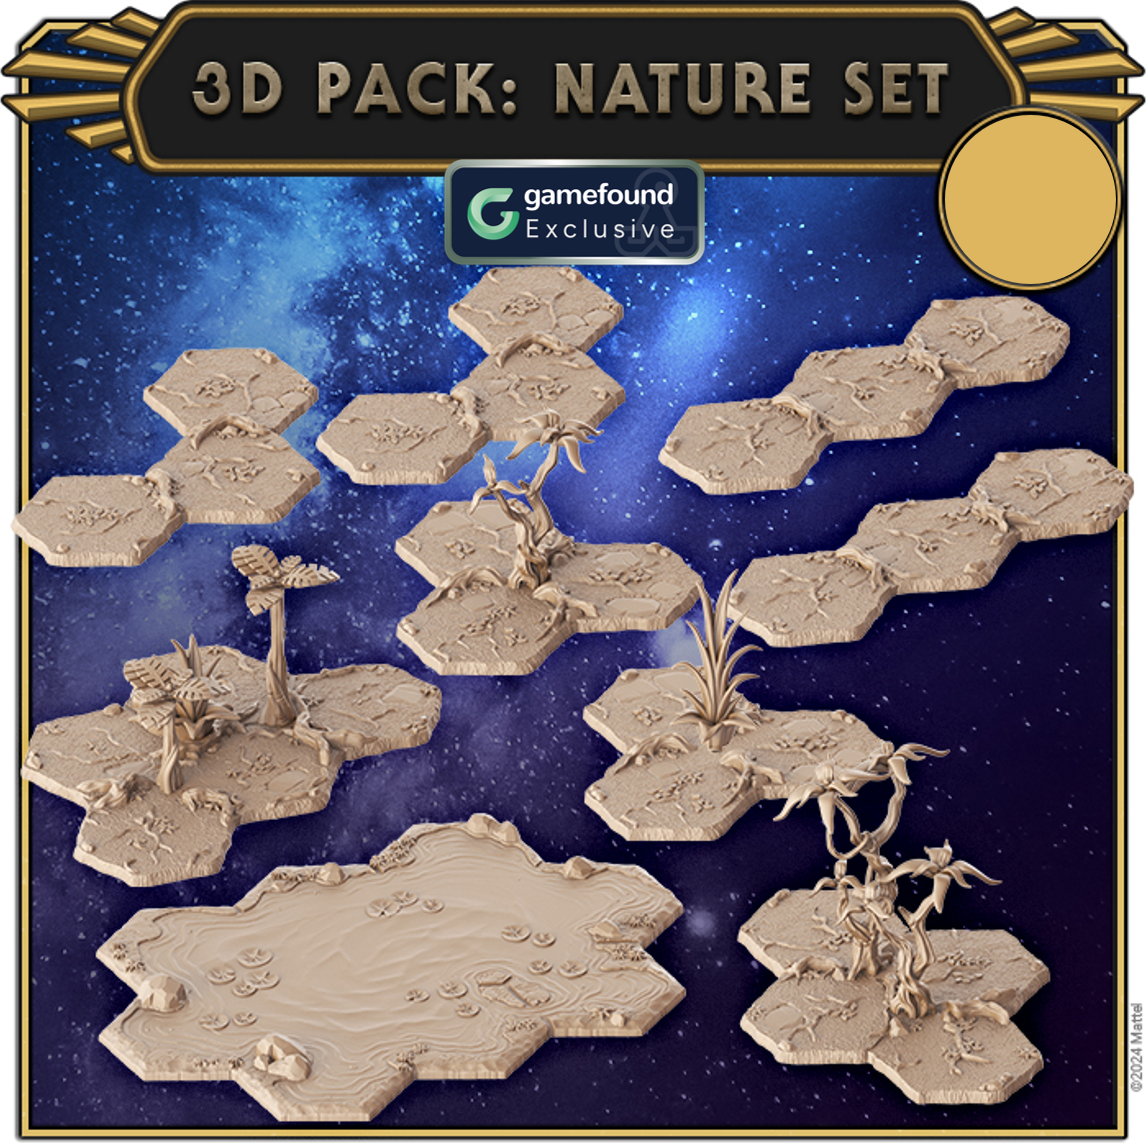 Crowdfunding Exclusive Masters of The Universe: The Board Game - Clash For Eternia 3D Pack: Nature Set